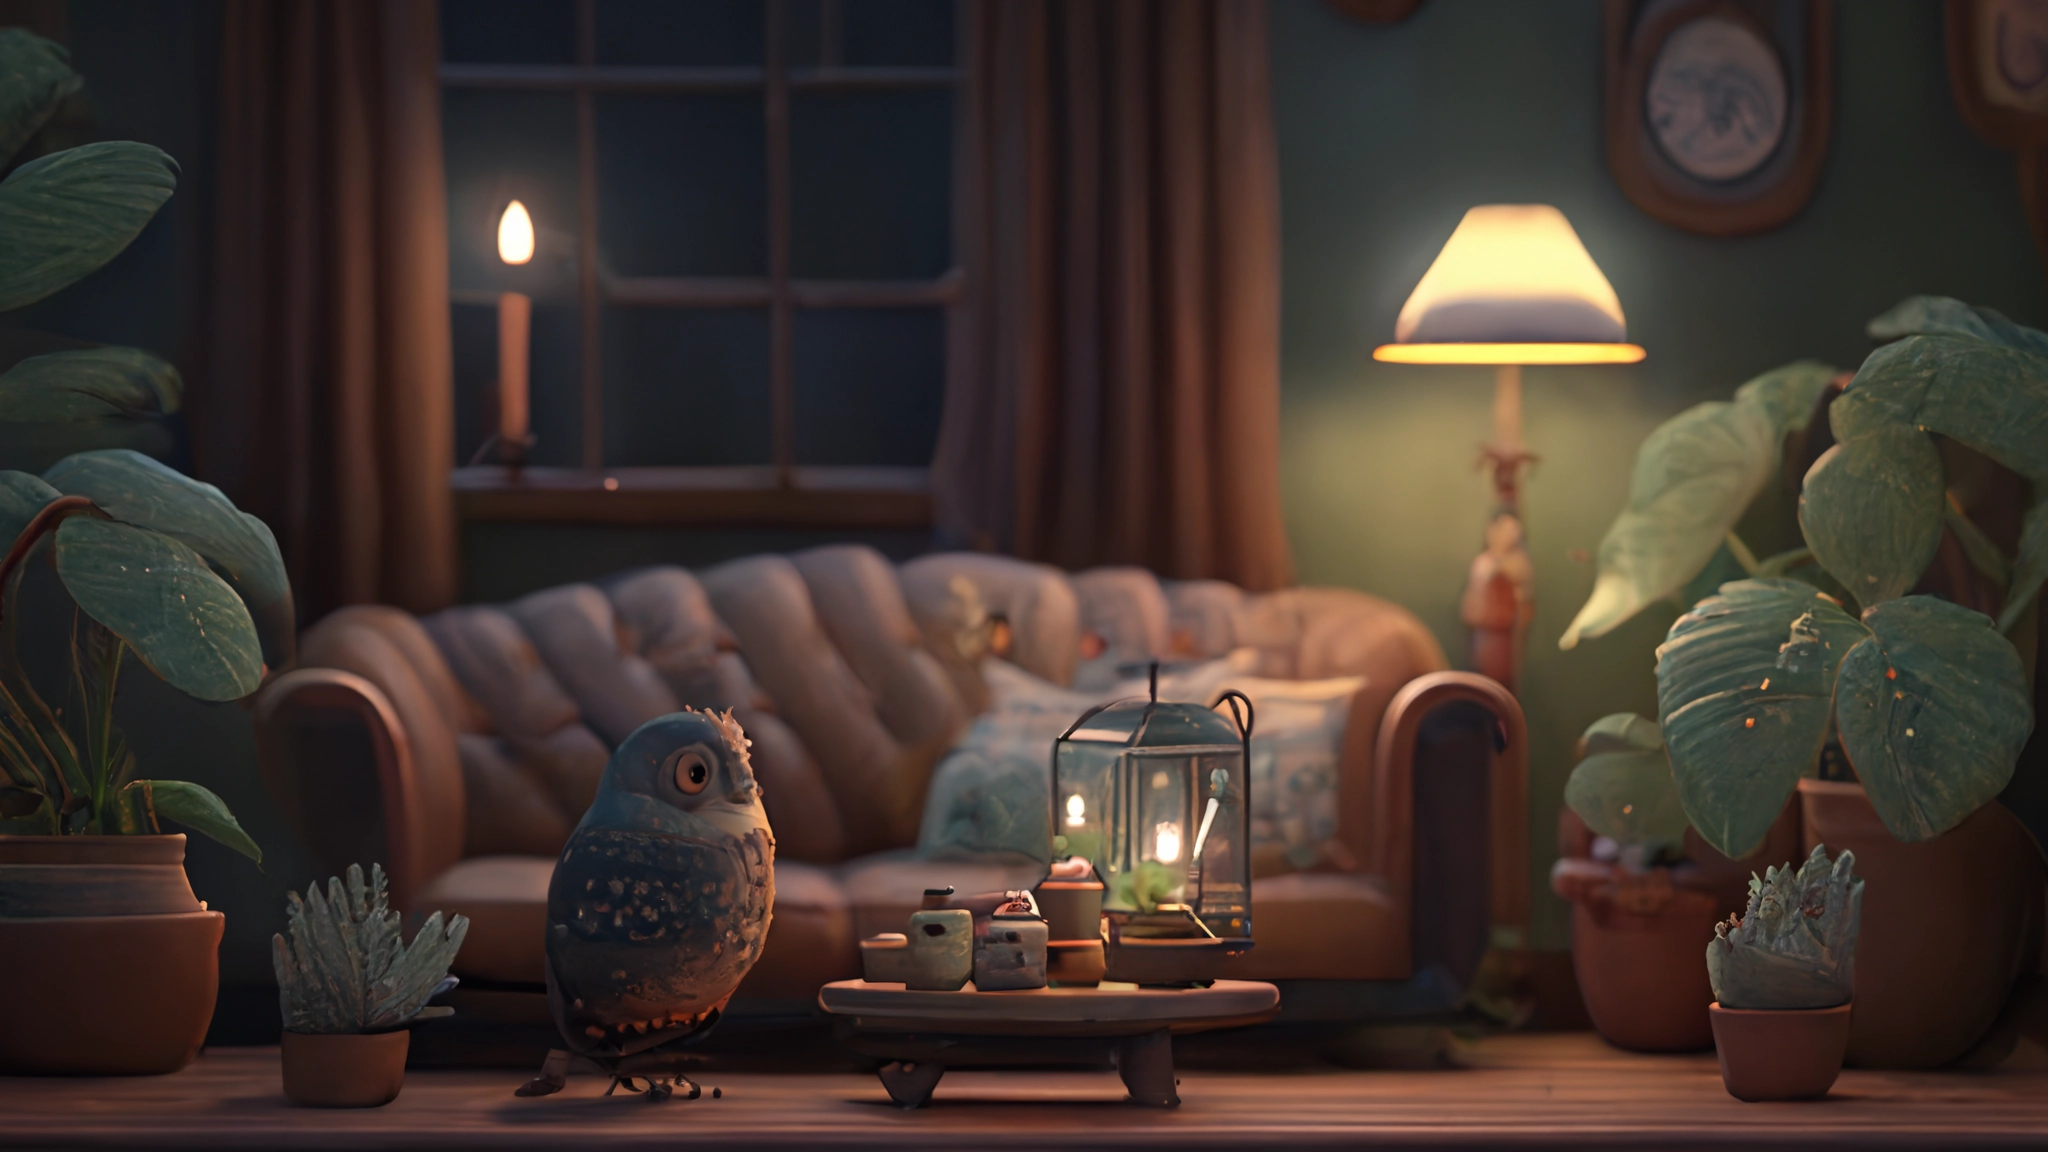 a_cozy_indoor_scene_with_intricate_lighting_and_attention